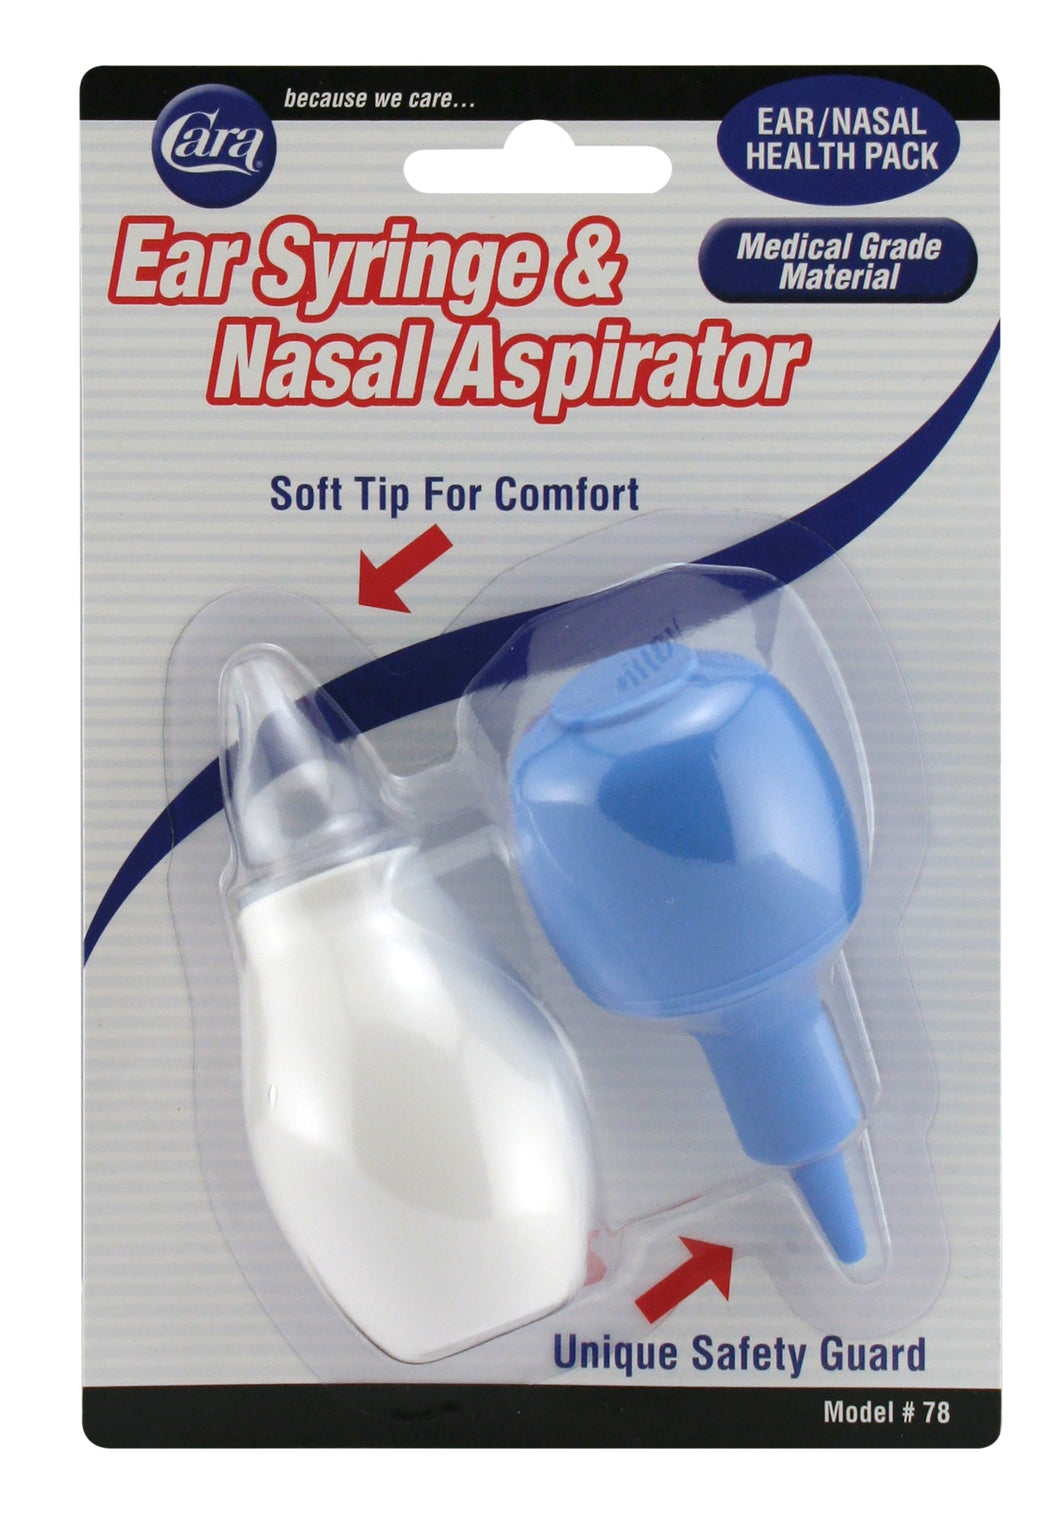 Model # 78 Ear Syringe and Nasal Aspirator with Unique Safety Guard